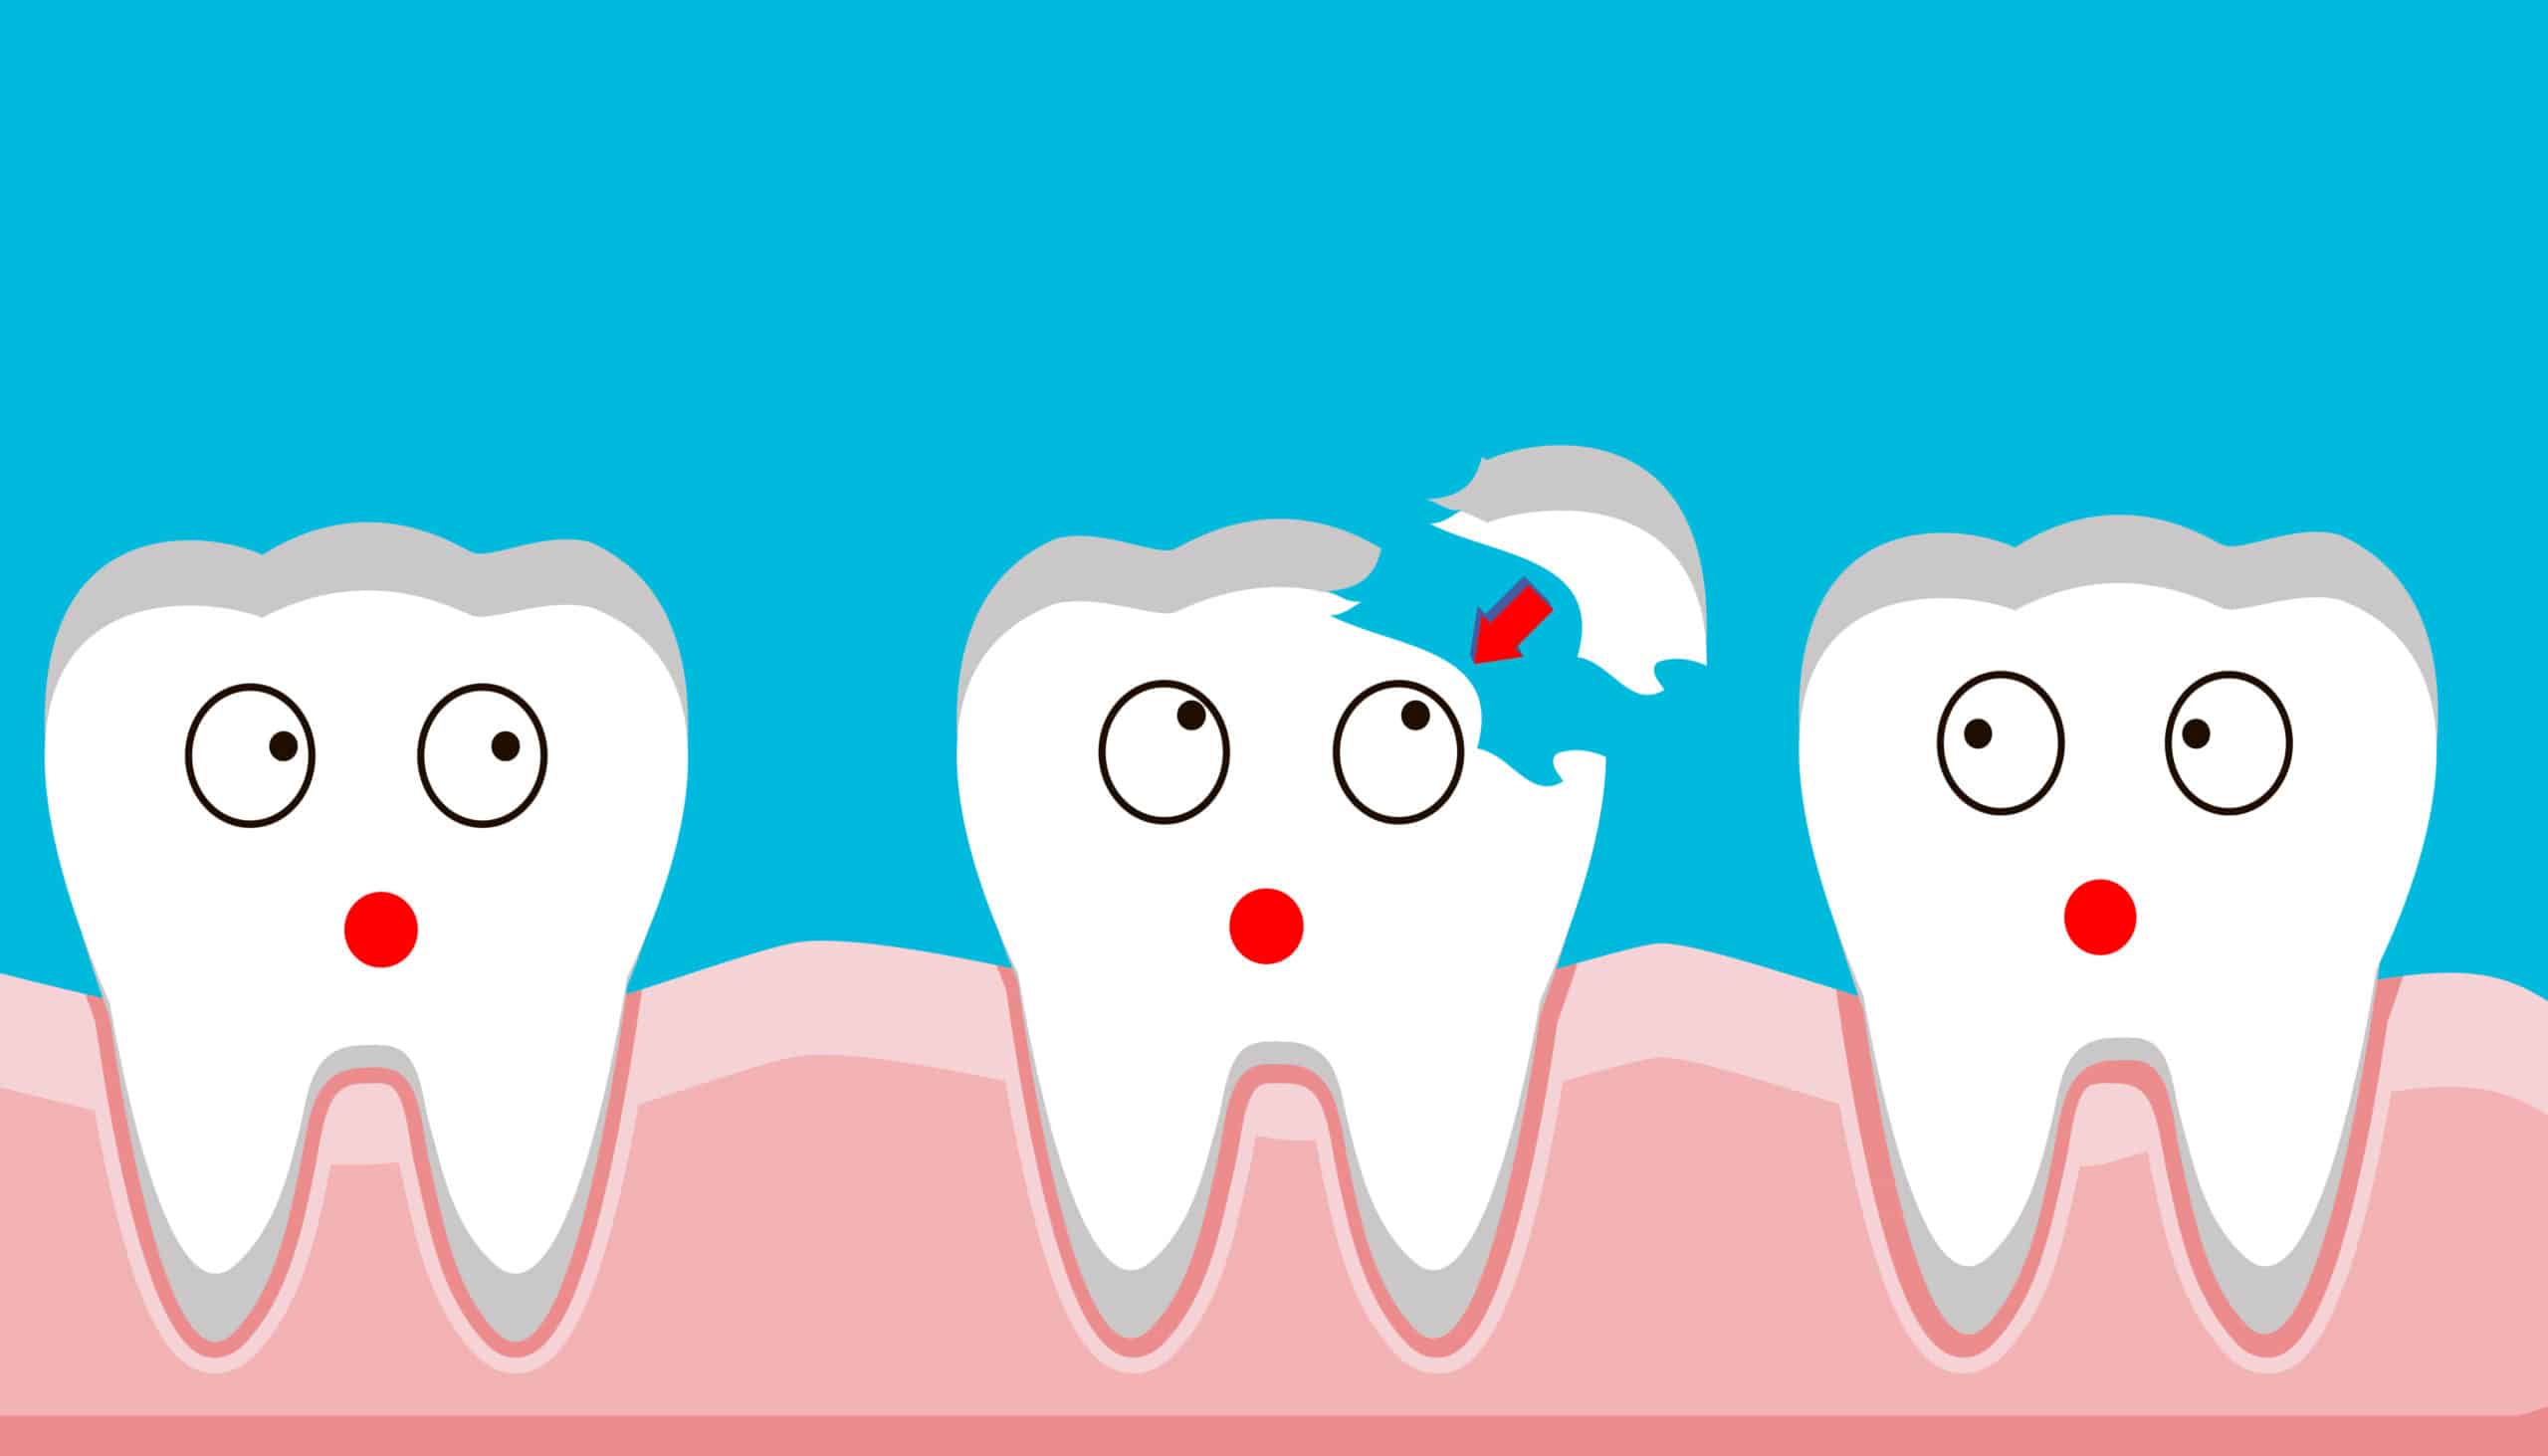 Illustration Of Cracked Tooth Repair Smile Mouth With Cracked